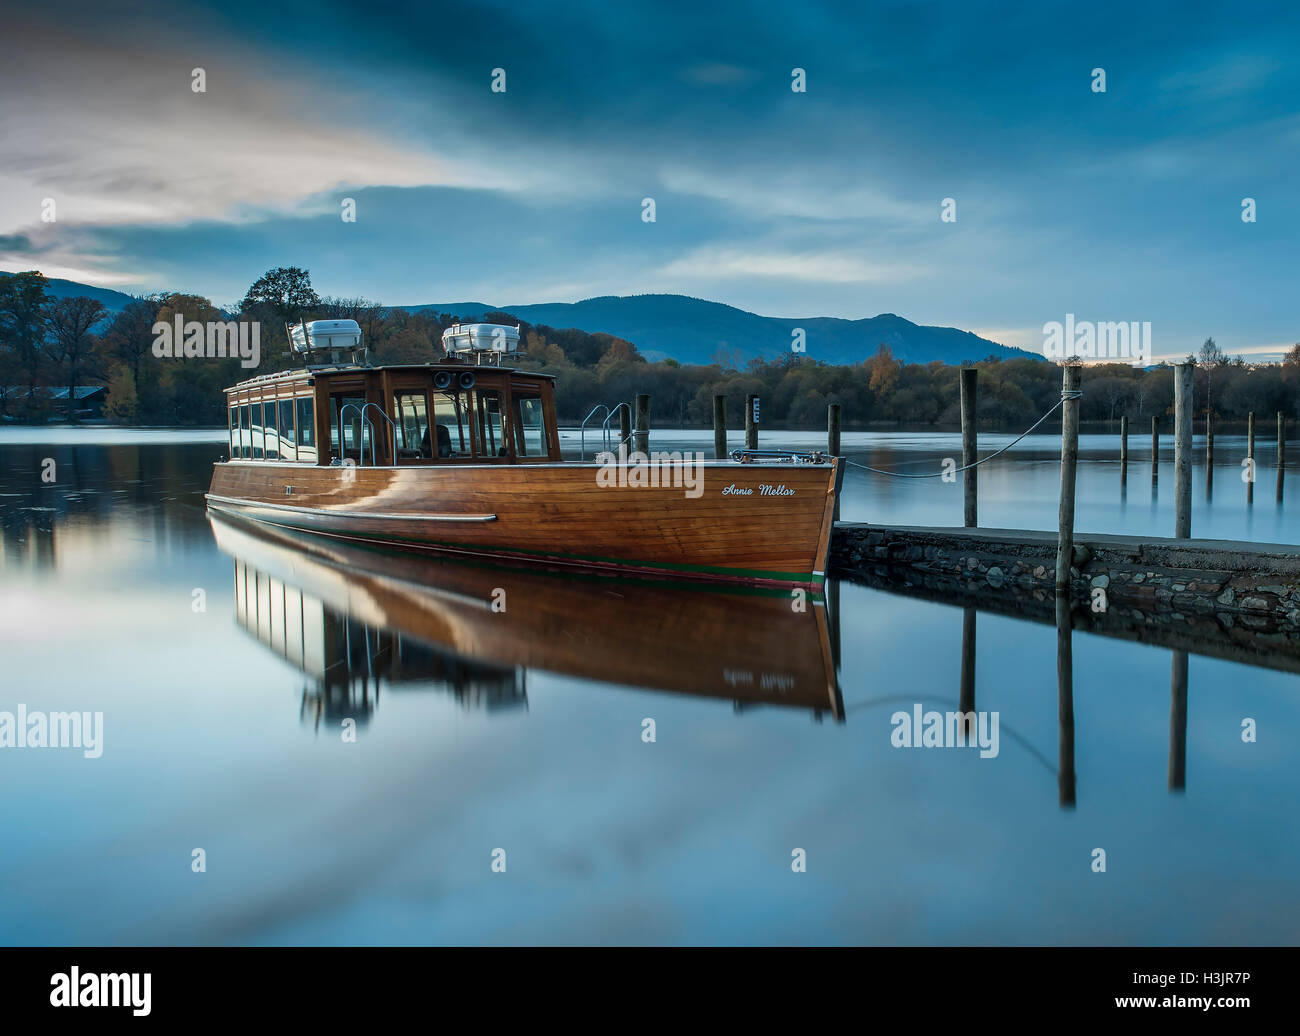 Keswick Launch moored at Twilight, Derwent Water, Lake District National Park, England, UK Stock Photo